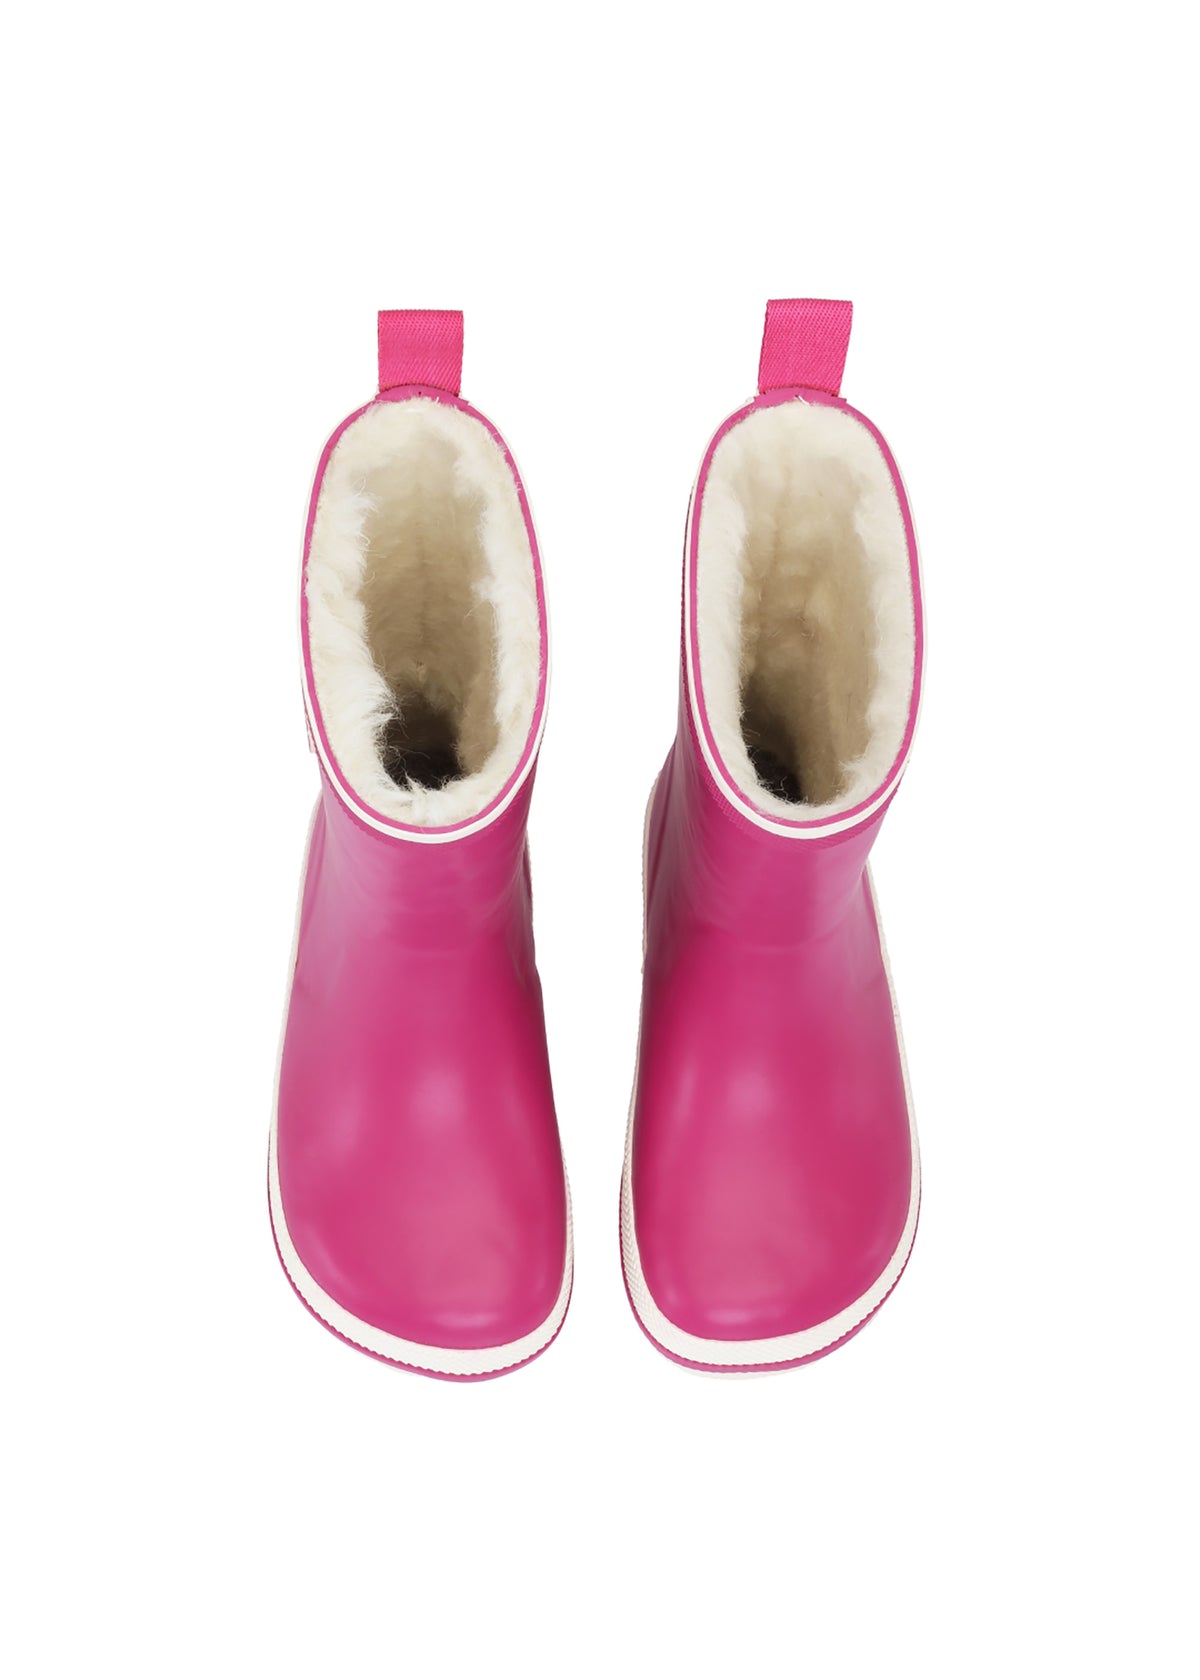 Rubber boots with a warm lining - raspberry red, Charly High Warm